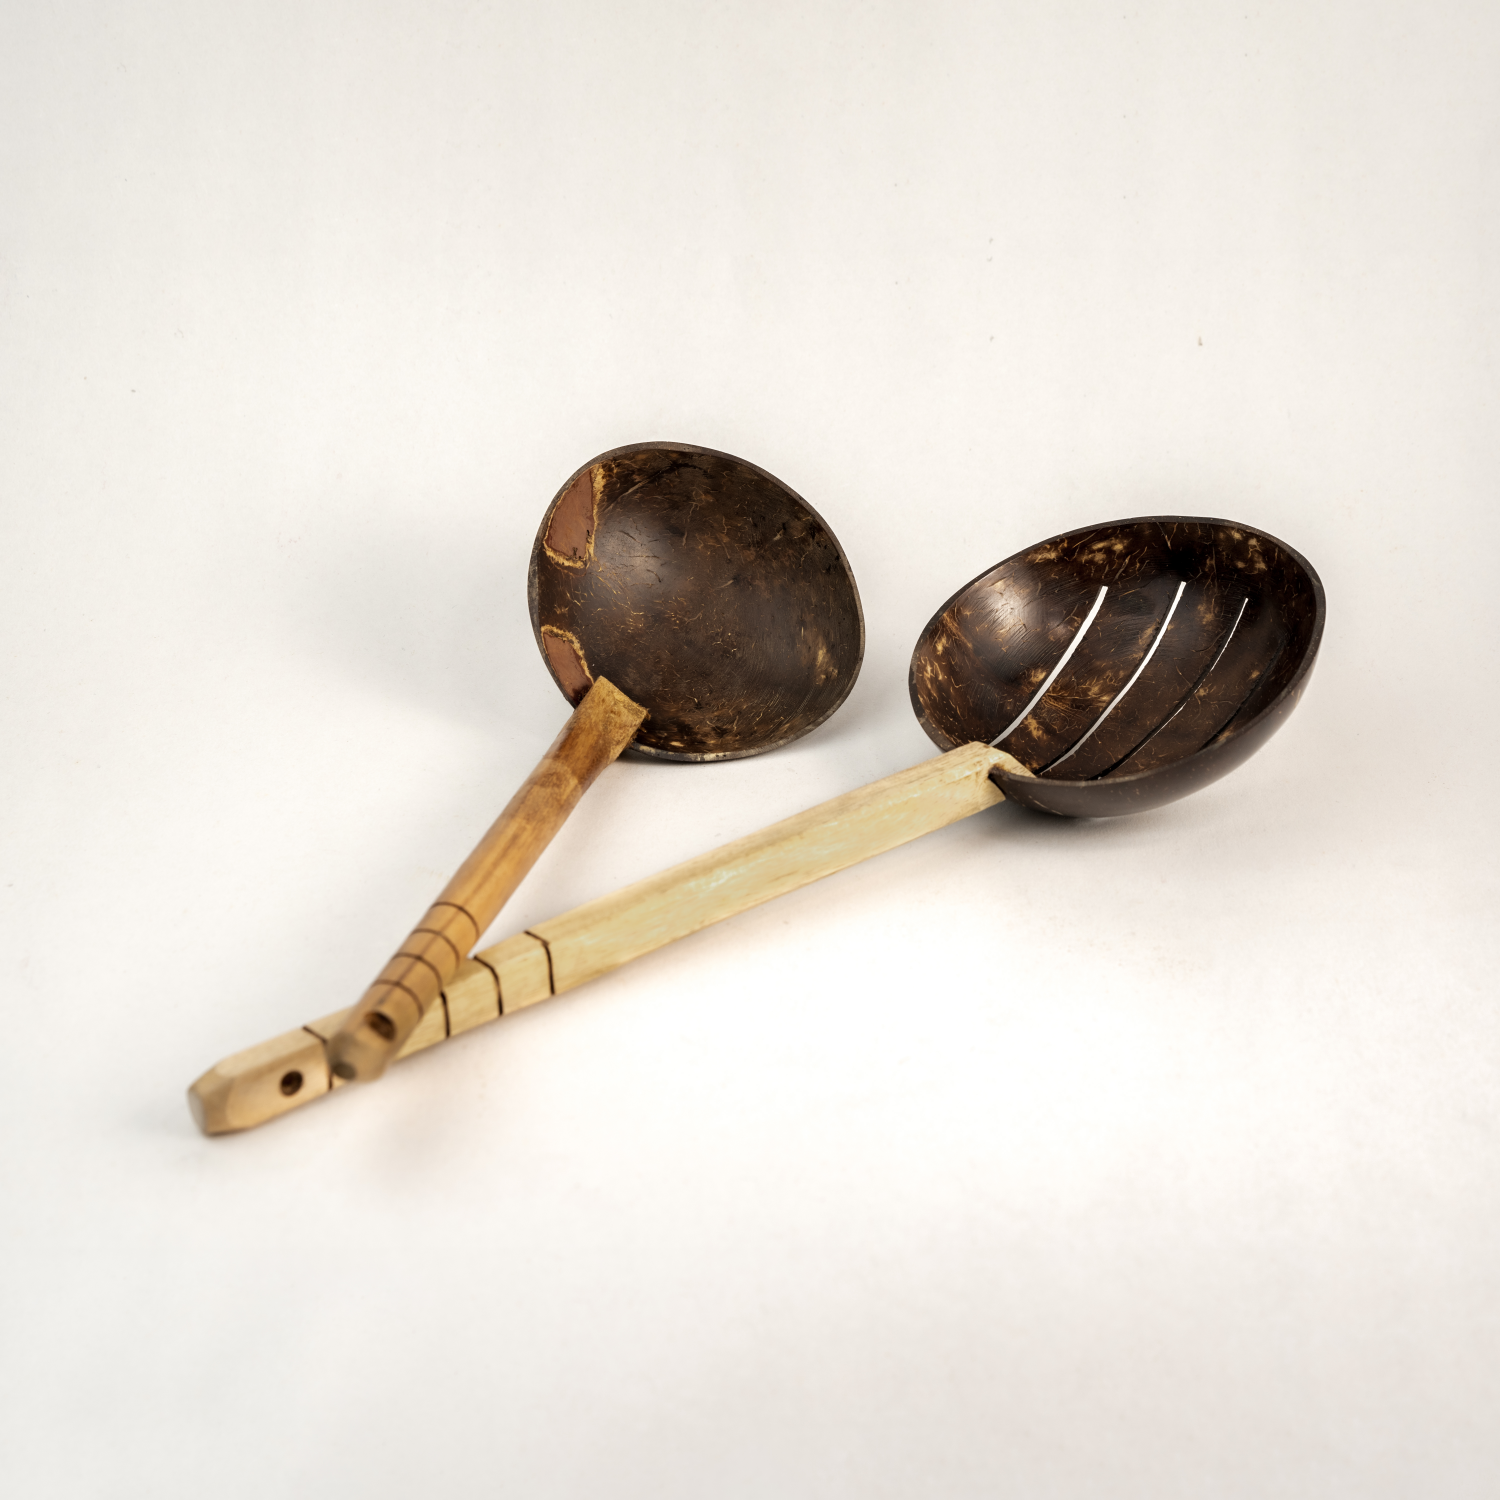  Coconut Shell Cooking Ladle and Spoon